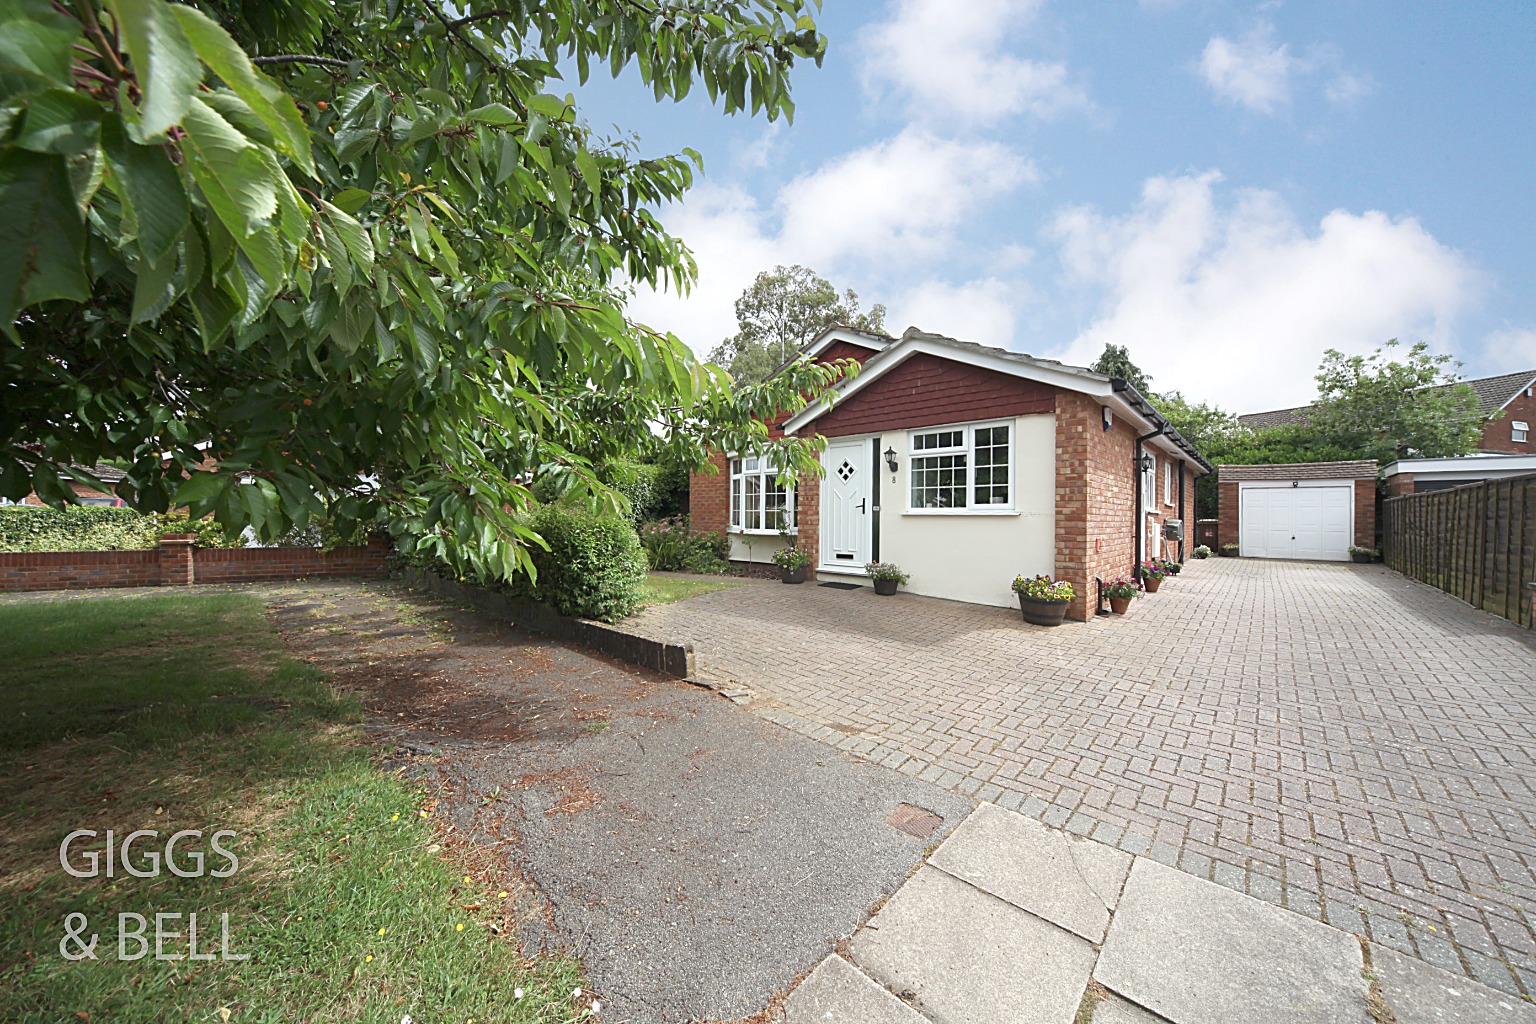 3 bed detached bungalow for sale in Sedbury Close, Luton, LU3 